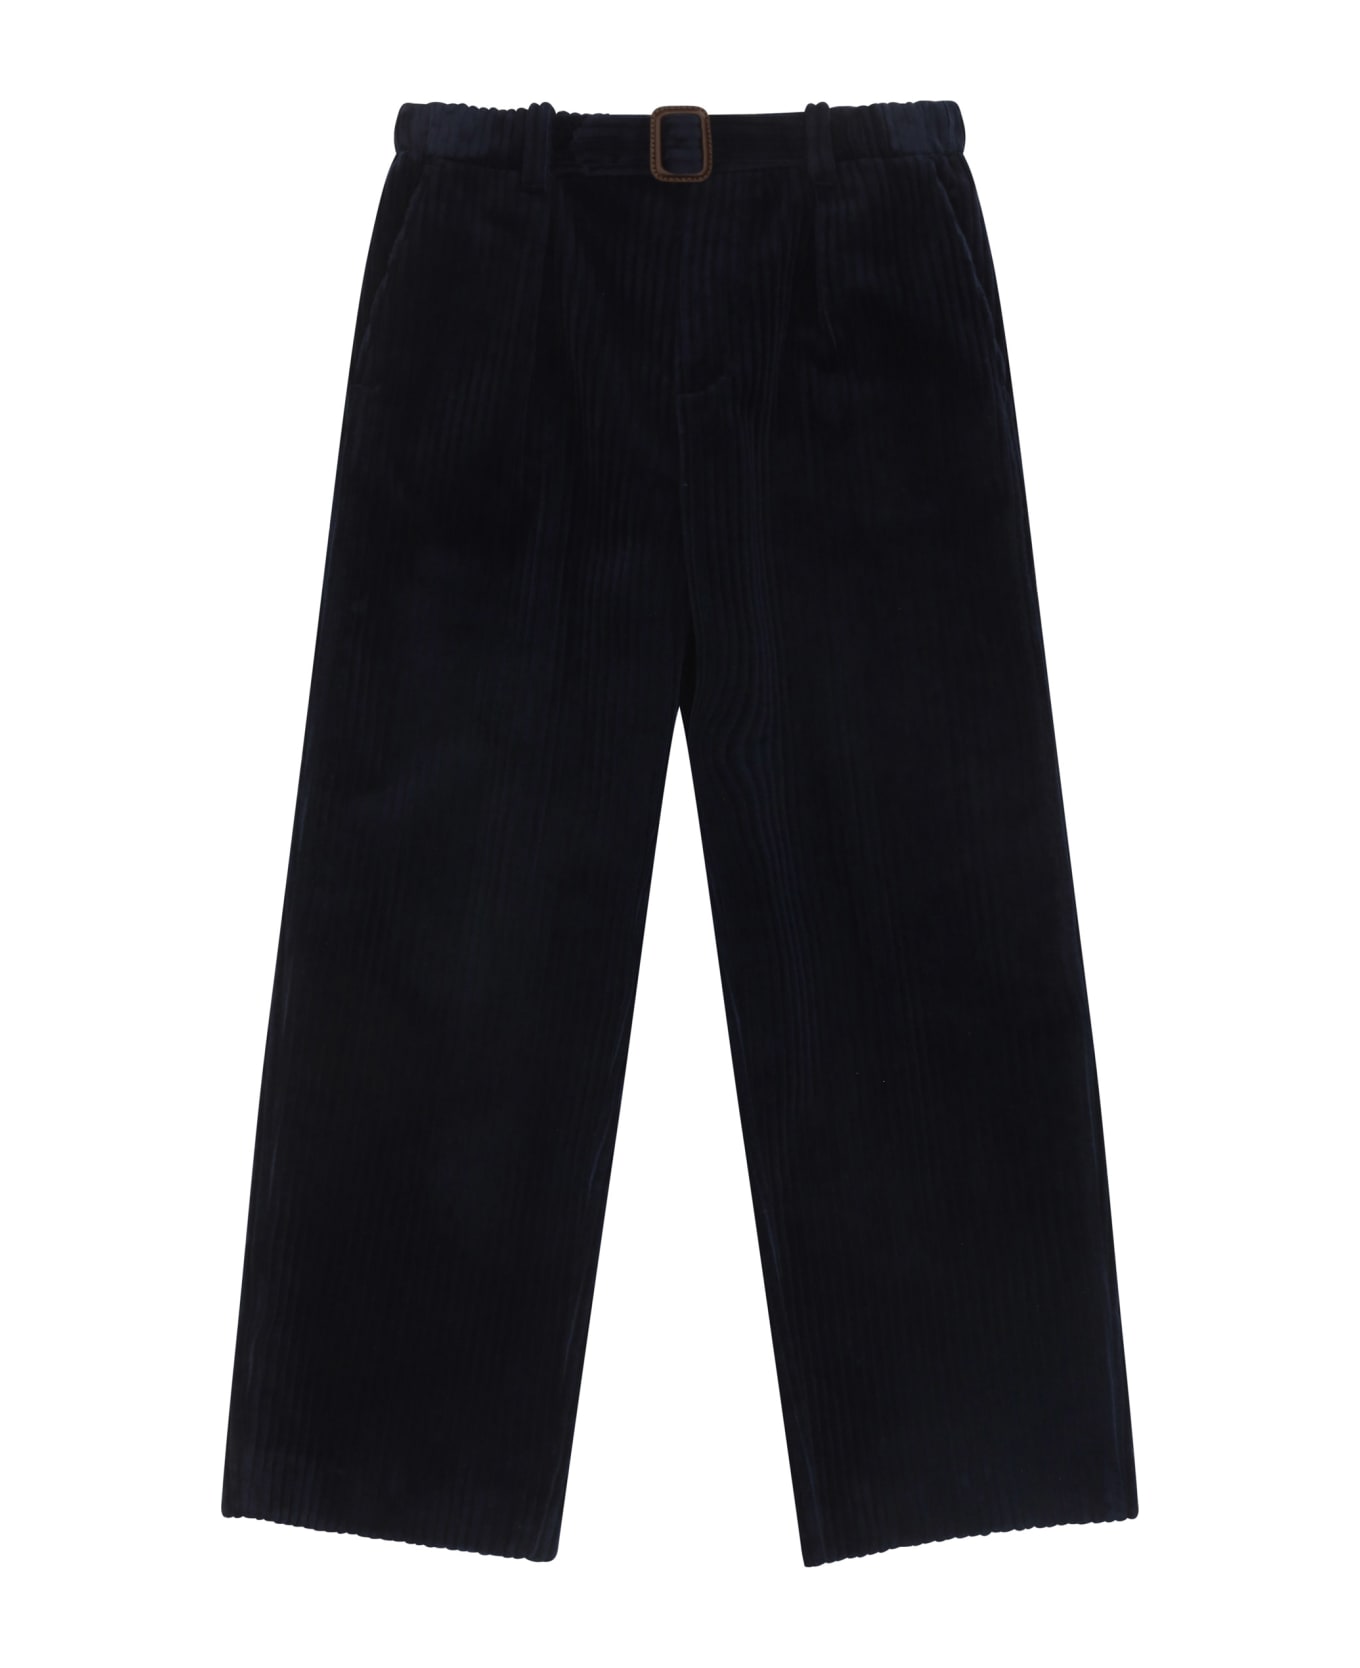 Gucci Pants For Boy - Navy